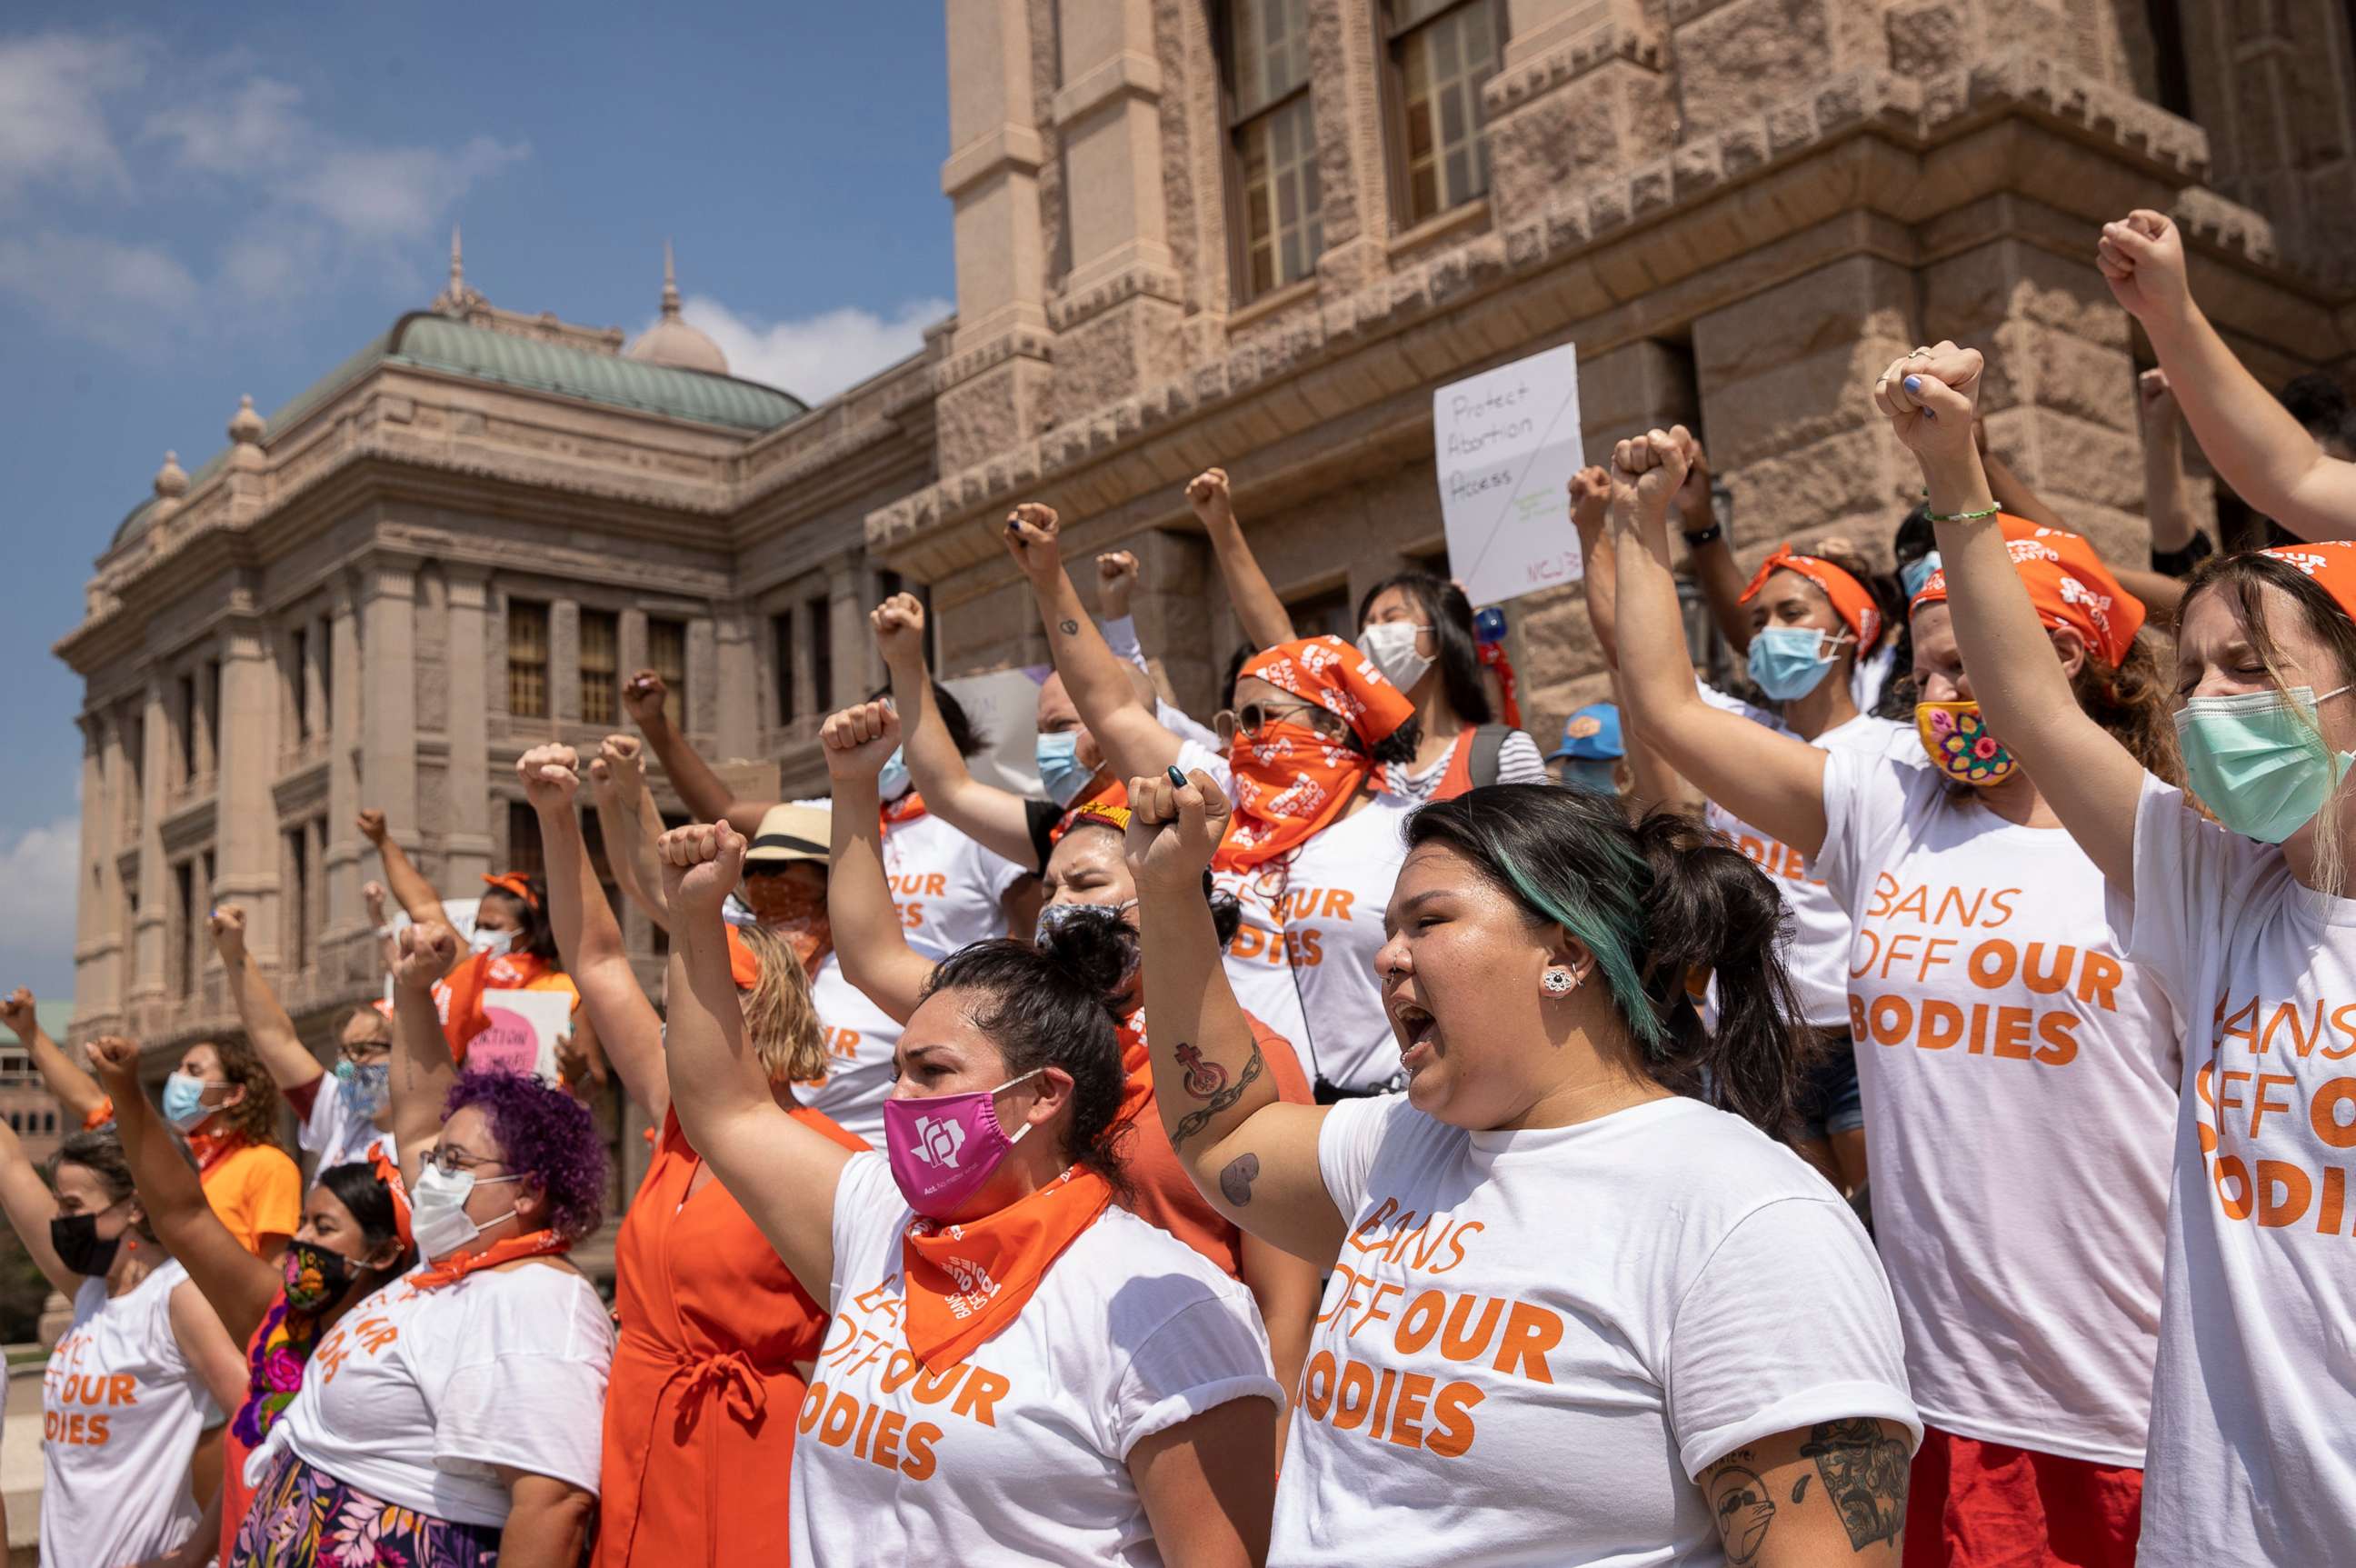 PHOTO: Women protest against the six-week abortion ban at the Capitol on Sept. 1, 2021, in Austin, Texas.